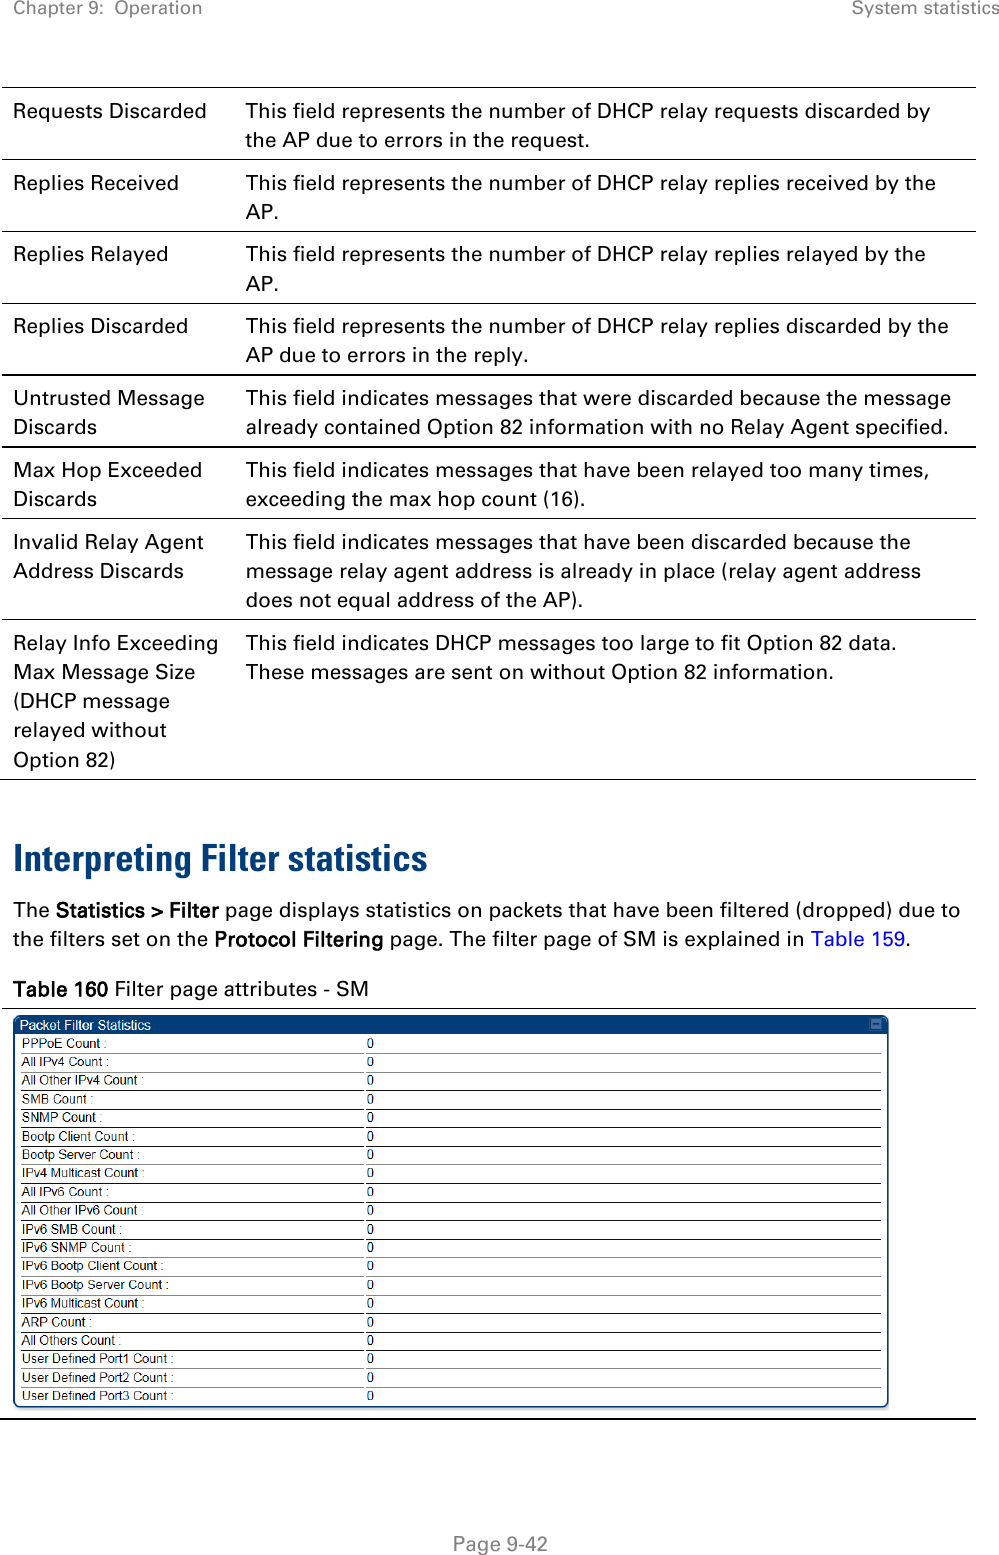 Chapter 9:  Operation System statistics   Page 9-42 Requests Discarded This field represents the number of DHCP relay requests discarded by the AP due to errors in the request. Replies Received This field represents the number of DHCP relay replies received by the AP. Replies Relayed This field represents the number of DHCP relay replies relayed by the AP. Replies Discarded This field represents the number of DHCP relay replies discarded by the AP due to errors in the reply. Untrusted Message Discards This field indicates messages that were discarded because the message already contained Option 82 information with no Relay Agent specified. Max Hop Exceeded Discards This field indicates messages that have been relayed too many times, exceeding the max hop count (16). Invalid Relay Agent Address Discards This field indicates messages that have been discarded because the message relay agent address is already in place (relay agent address does not equal address of the AP). Relay Info Exceeding Max Message Size (DHCP message relayed without Option 82) This field indicates DHCP messages too large to fit Option 82 data.  These messages are sent on without Option 82 information.  Interpreting Filter statistics The Statistics &gt; Filter page displays statistics on packets that have been filtered (dropped) due to the filters set on the Protocol Filtering page. The filter page of SM is explained in Table 159. Table 160 Filter page attributes - SM  